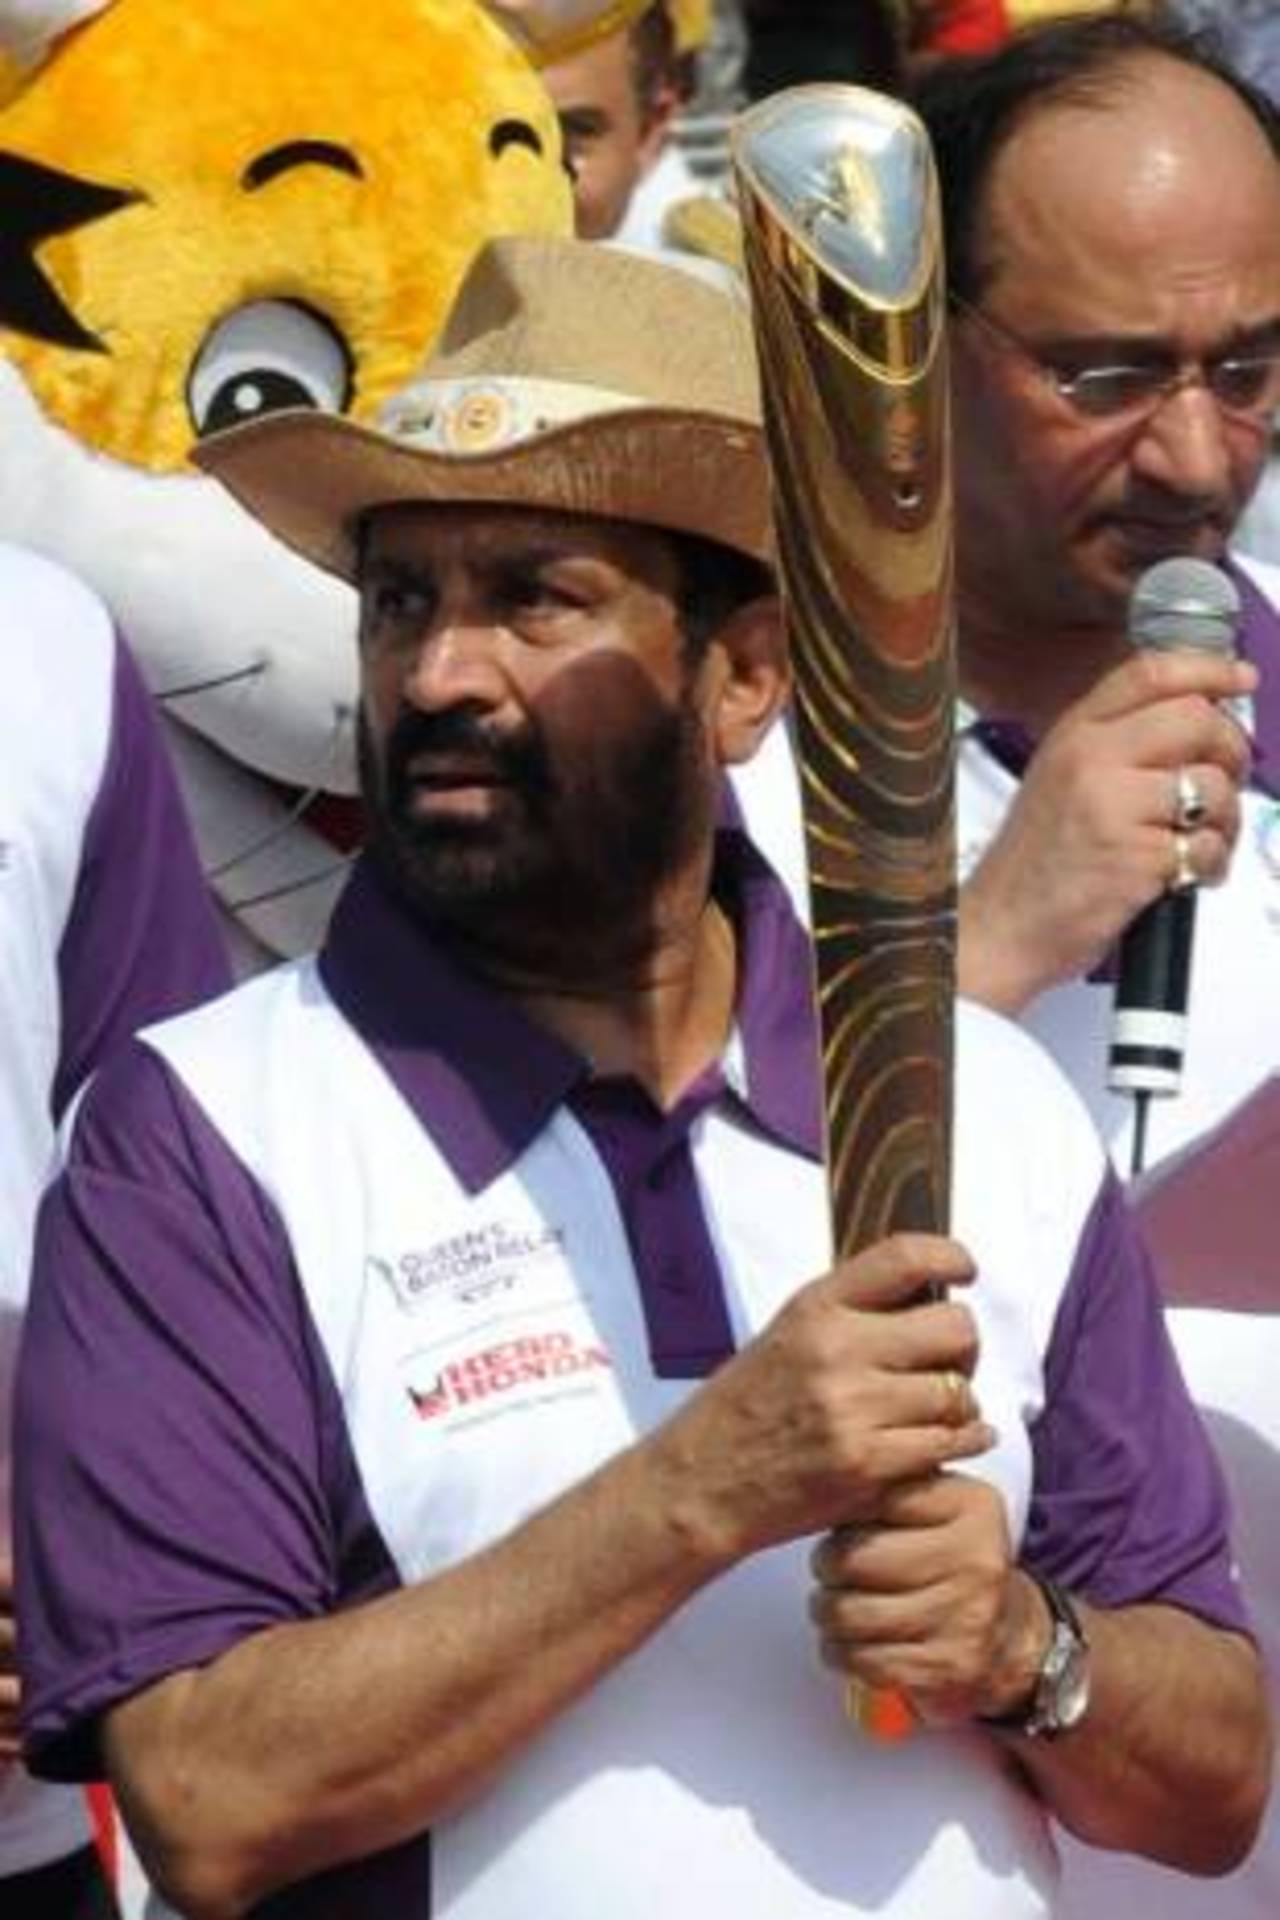 Suresh Kalmadi realises his attempt to pass himself off as Milkha Singh is probably not going to work&nbsp;&nbsp;&bull;&nbsp;&nbsp;AFP